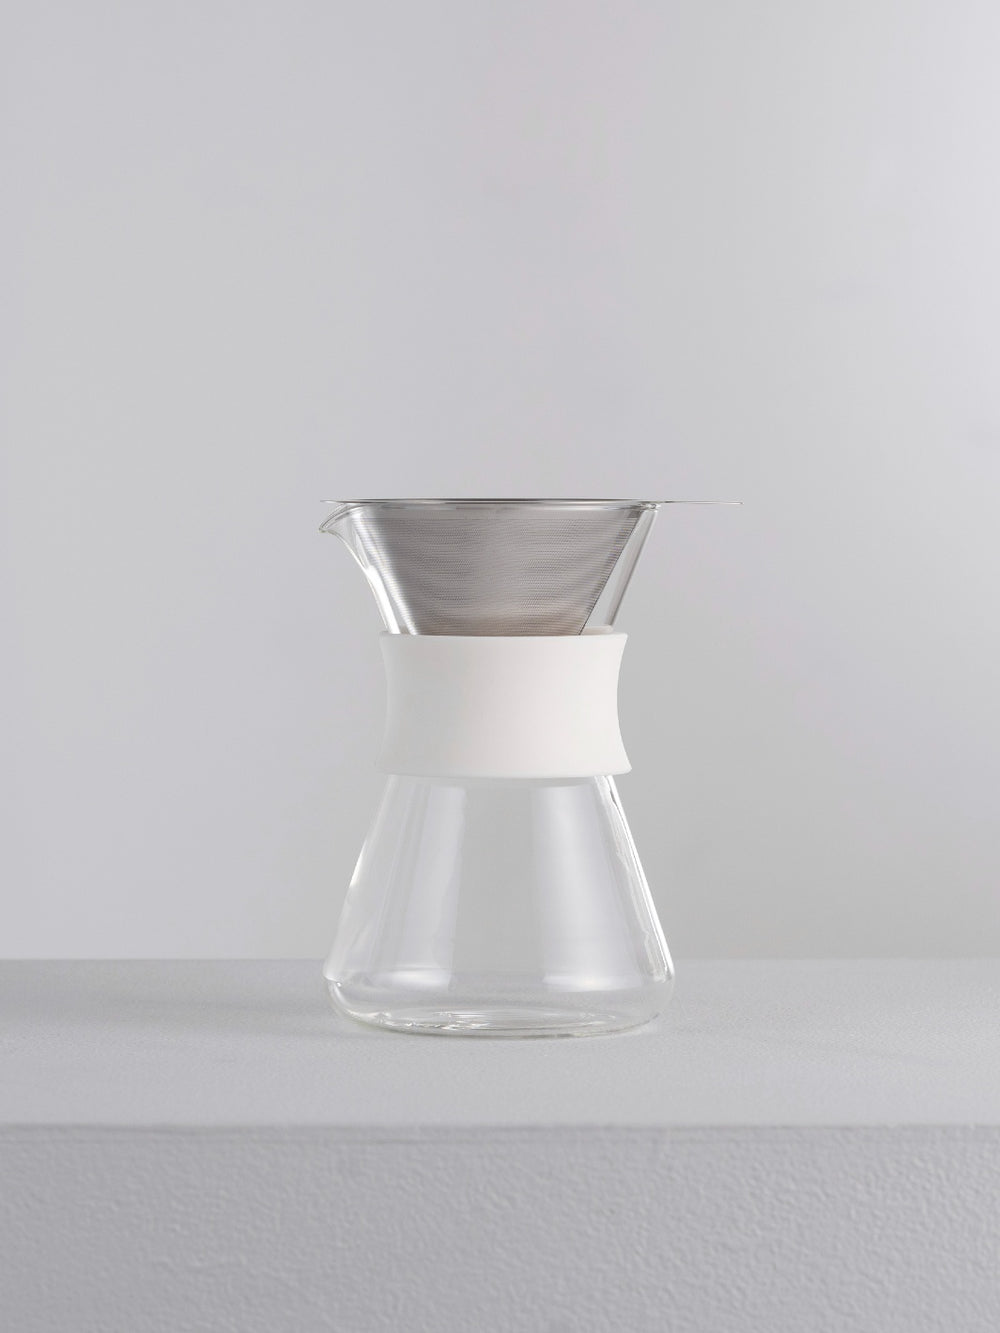 Photo of HARIO SIMPLY Glass Coffee Maker ( ) [ HARIO ] [ Pourover Brewers ]